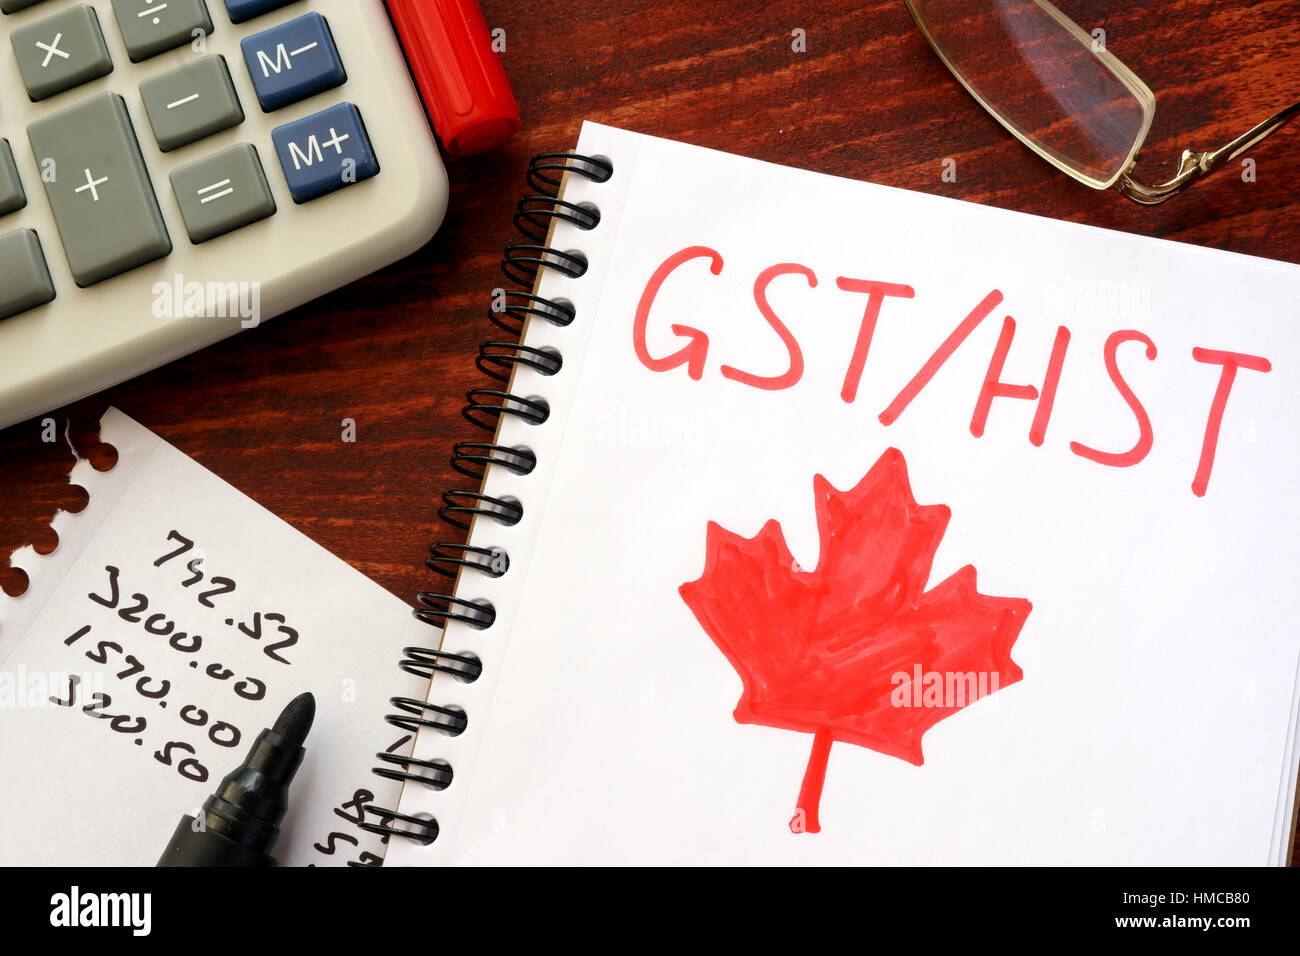 Quick Method Of GST/HST Tax Rules - Can this Minimize Your Taxes? Image